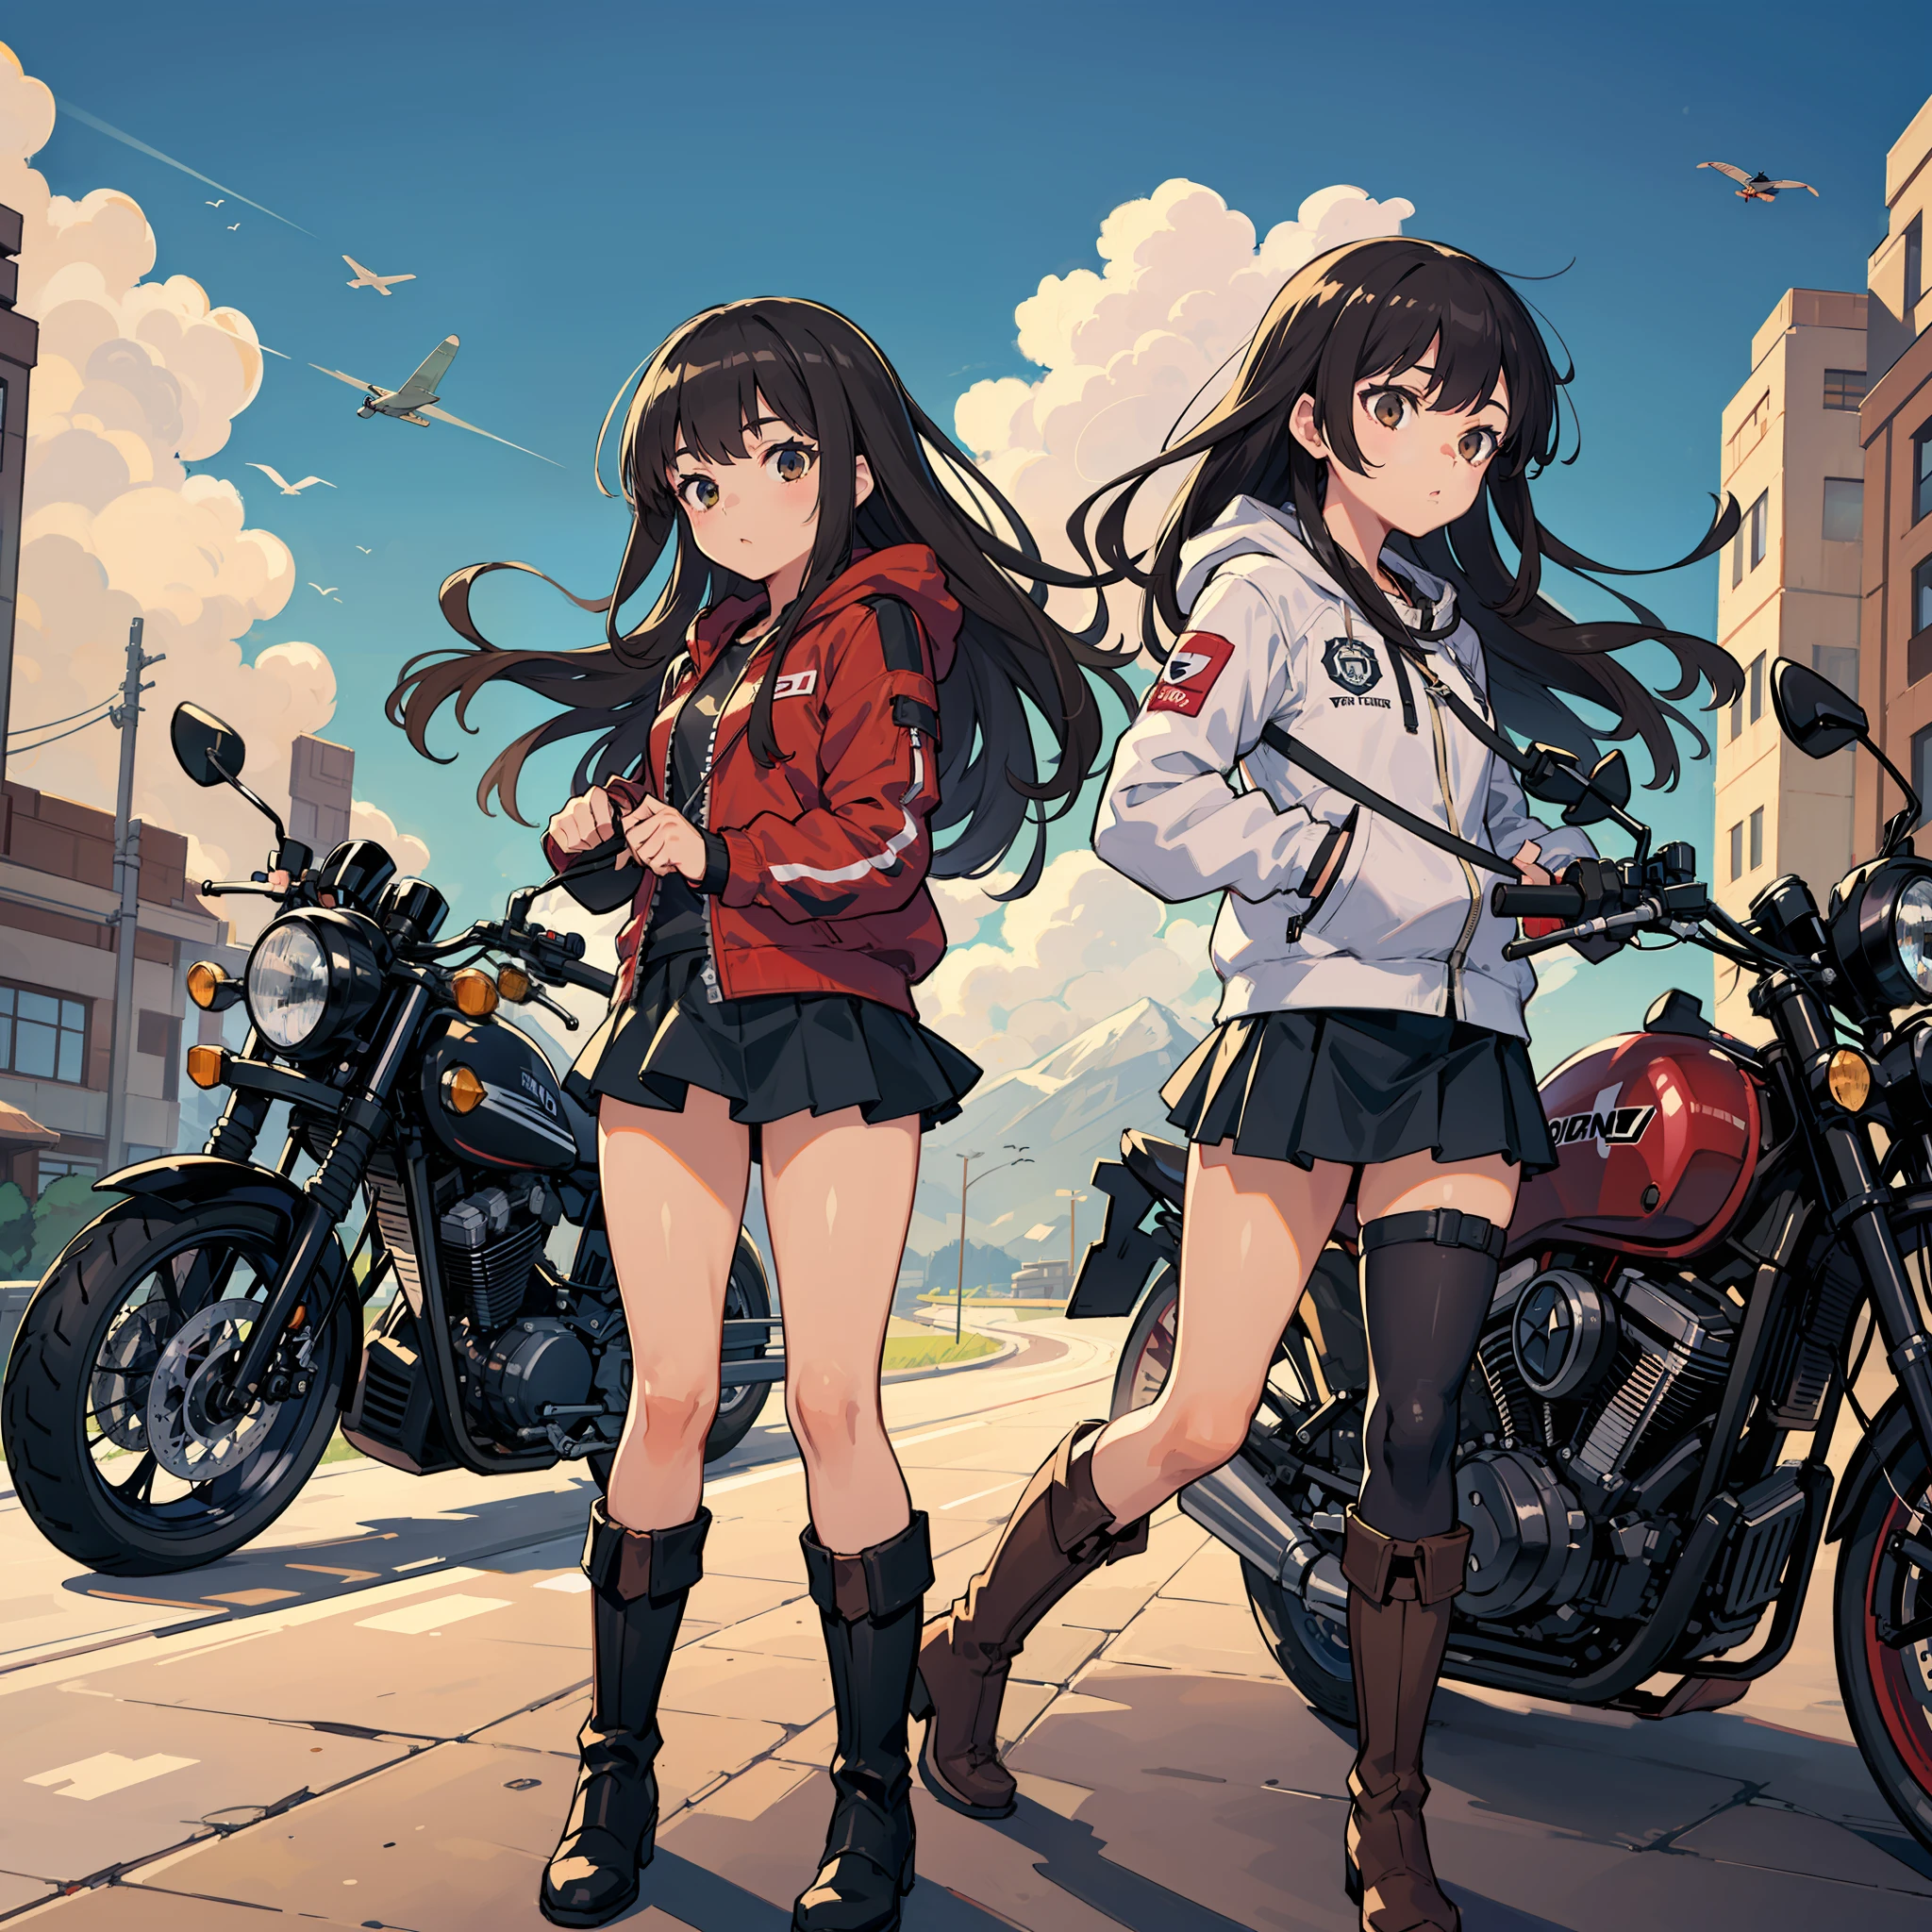 Two beautiful girls, black hair long hair, brown hair shortcut, fluttering hair, travel, motorcycle, touring, tandem, SR400, horizon, continent, flight jacket, riders jacket, hood, goggles, hot pants, mini skirt, knee support, boots, clear weather, morning sun, with dog